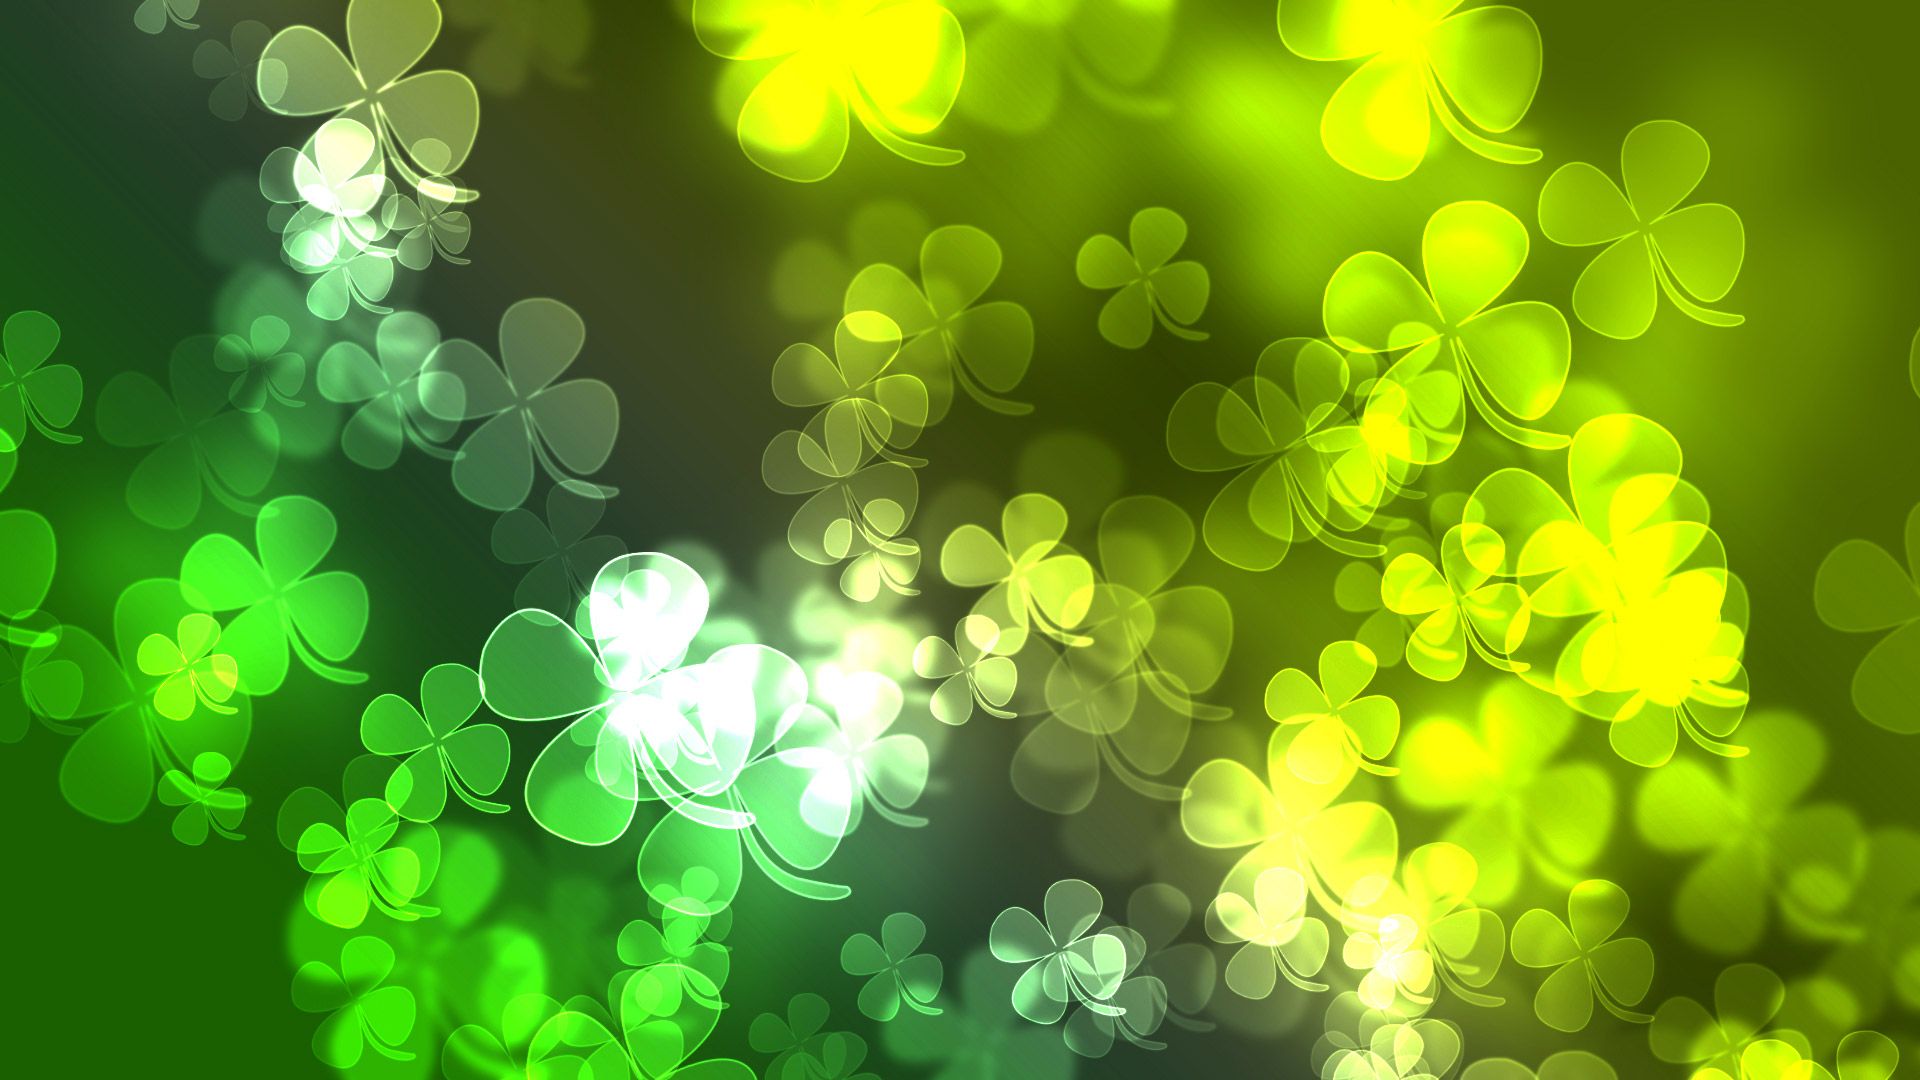 23 St. Patricks Day themed wallpapers for your Android